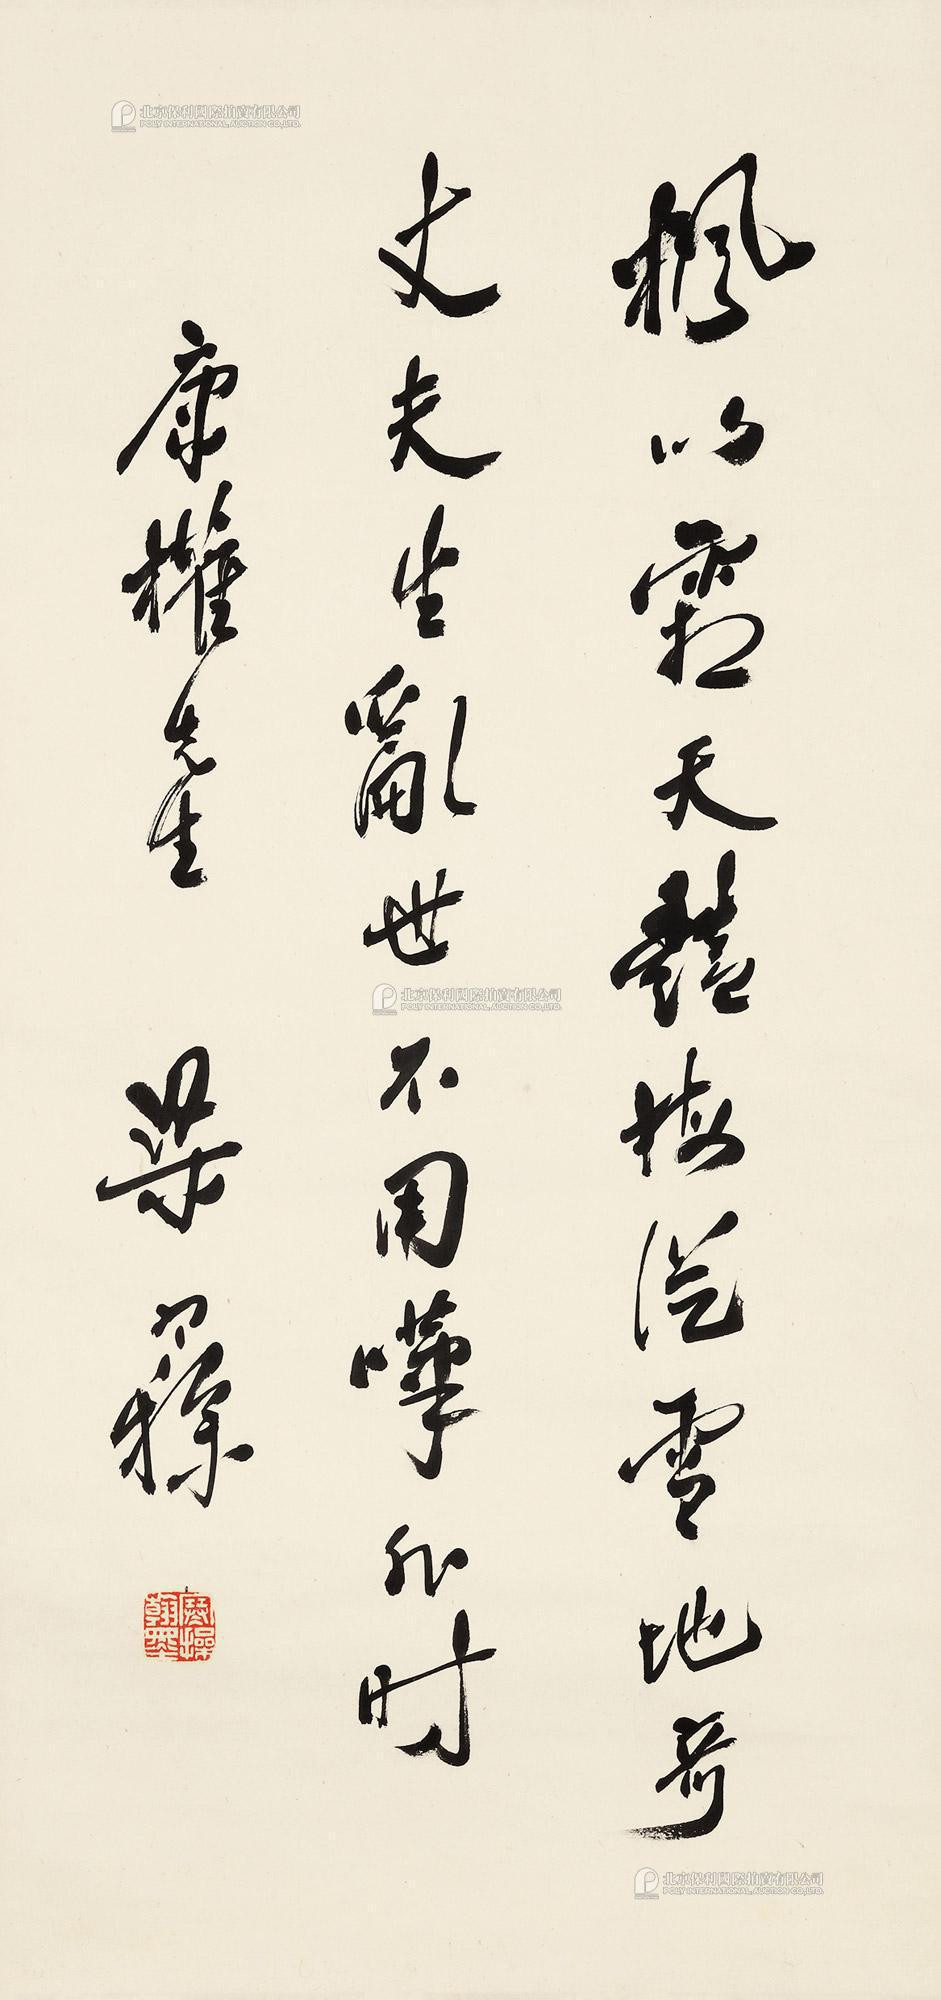 Calligraphy by Liang Hancao